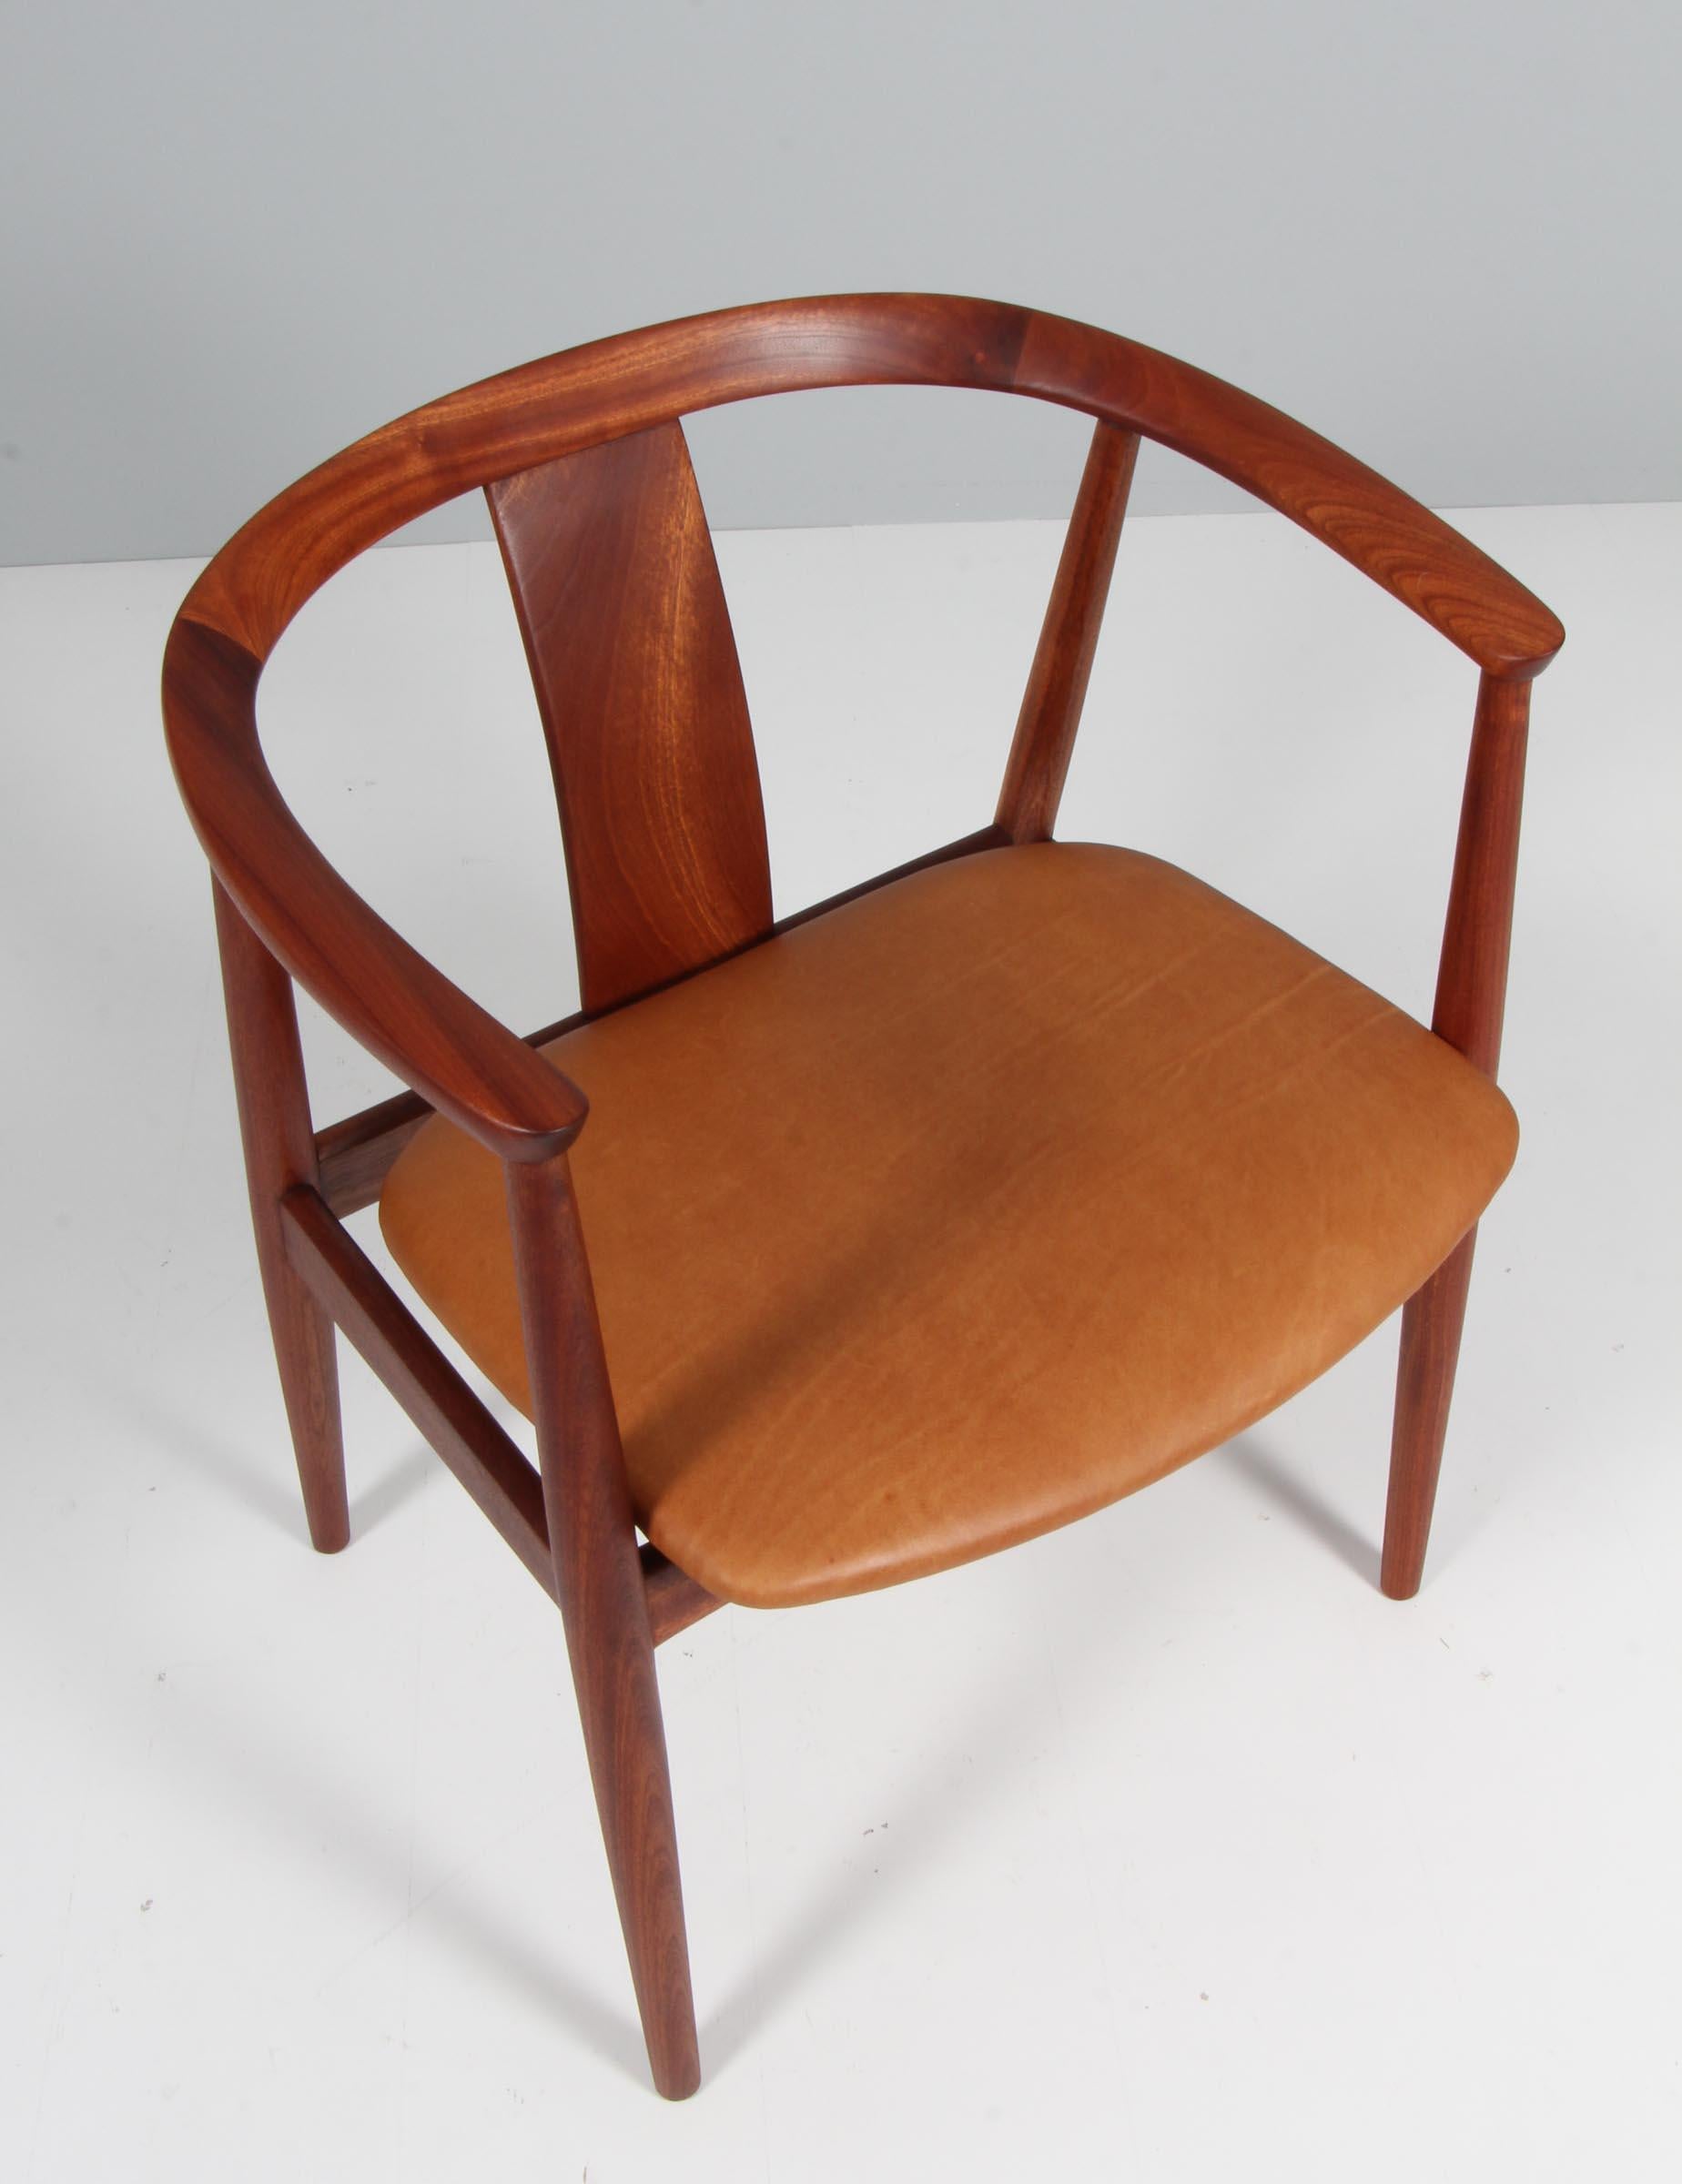 Tove & Edvard Kindt-Larsen. Armchair in oiled mahogany.

Seat new upholstered with leather.

Made in the 1950s apparently by Gustav Berthelsen.
 